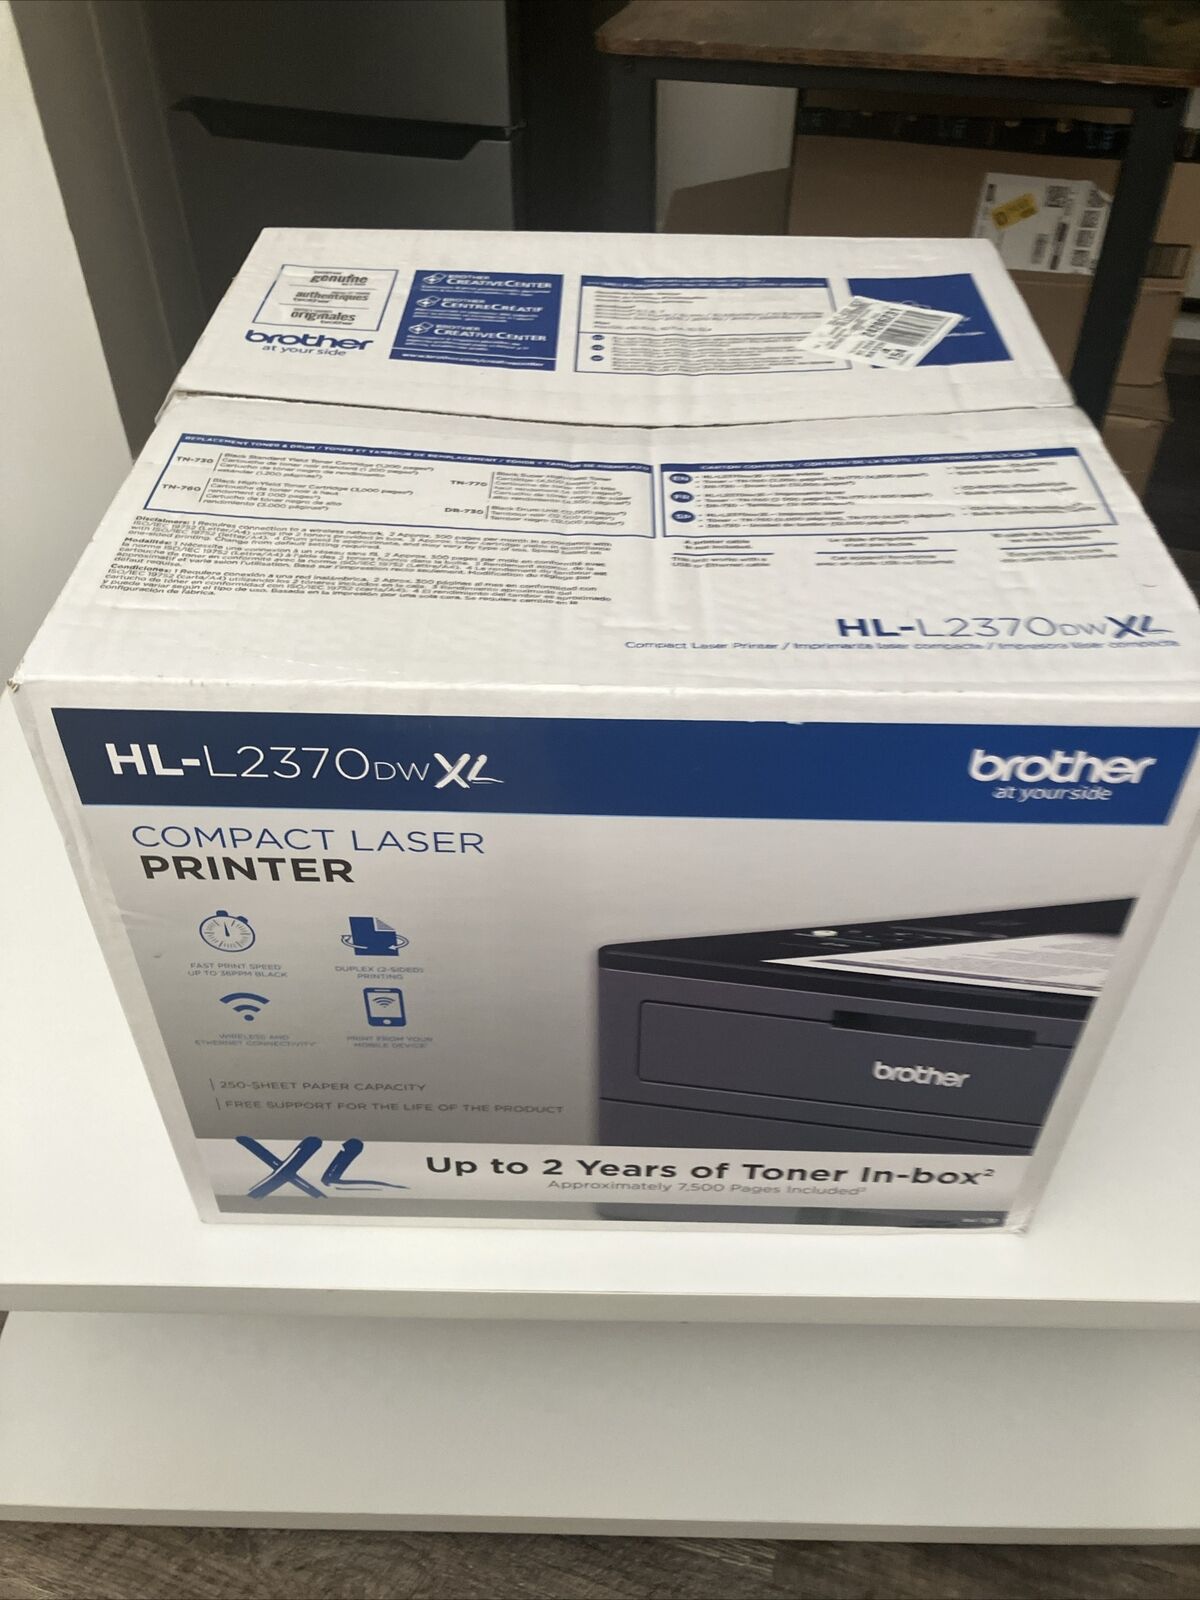 Brother HL-L2370DW XL Wireless Black-and-White Laser Printer - Brand New in Box